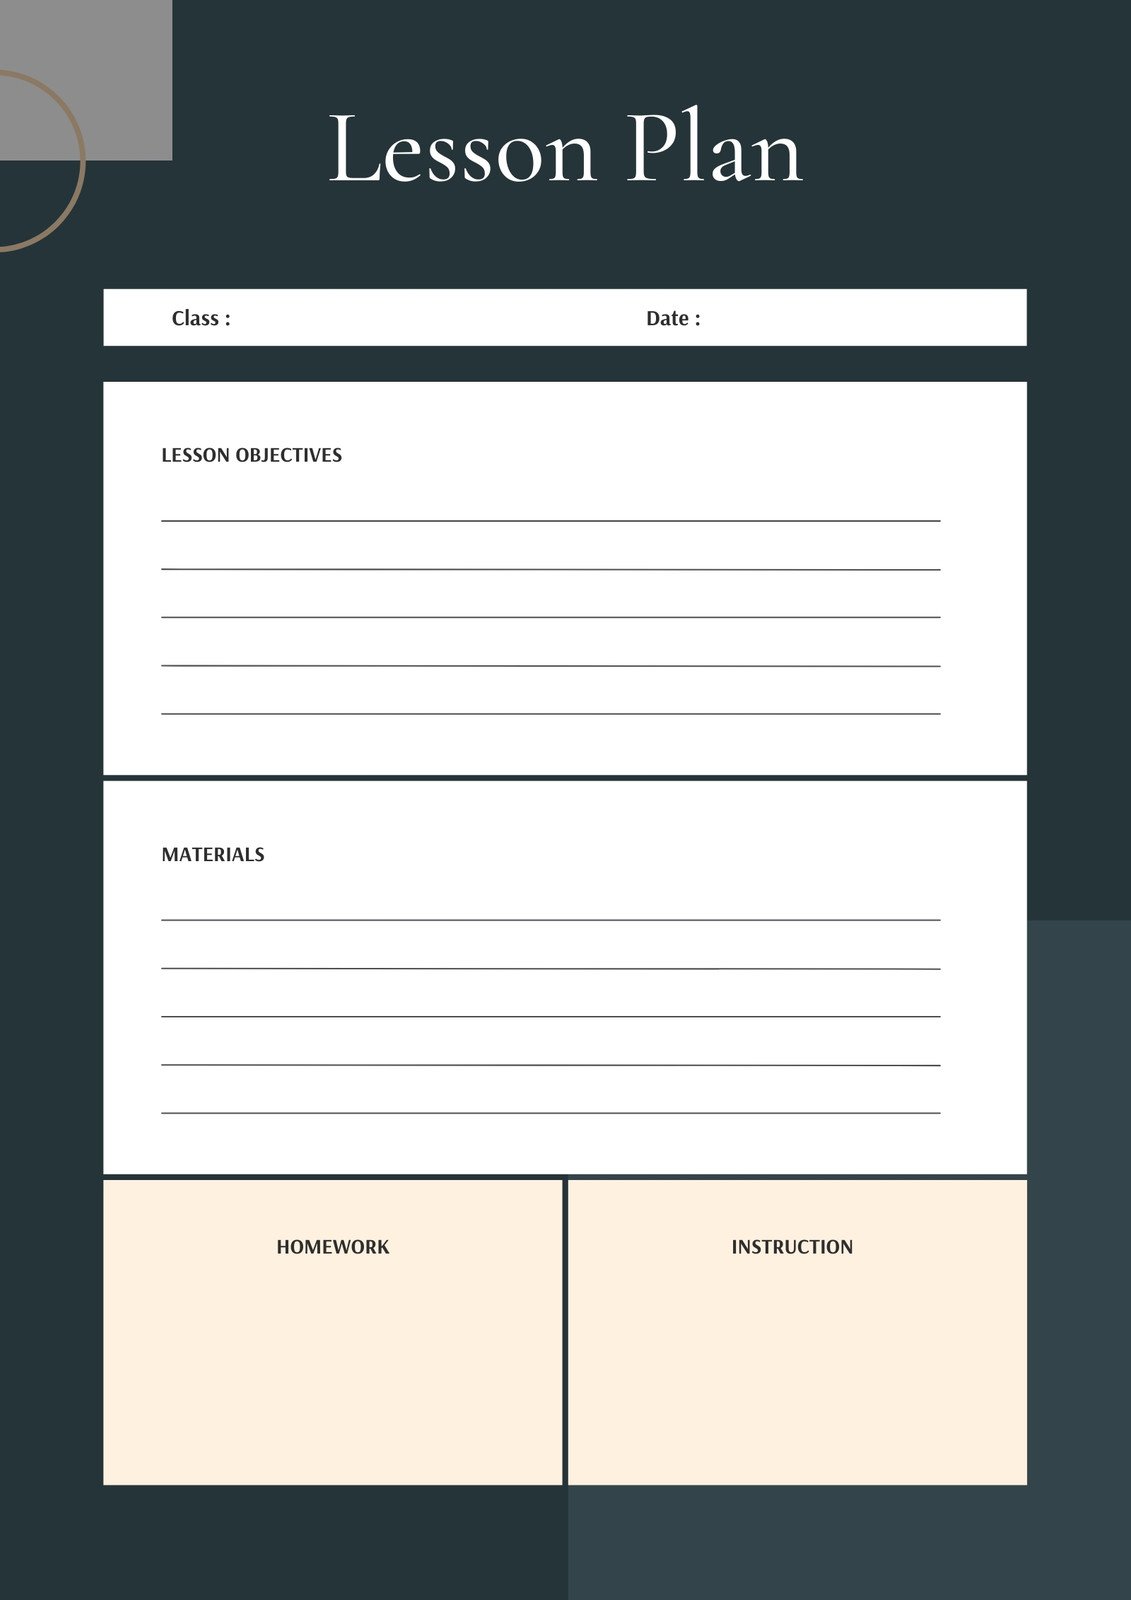 39-learning-focused-lesson-plan-template-shireejunior